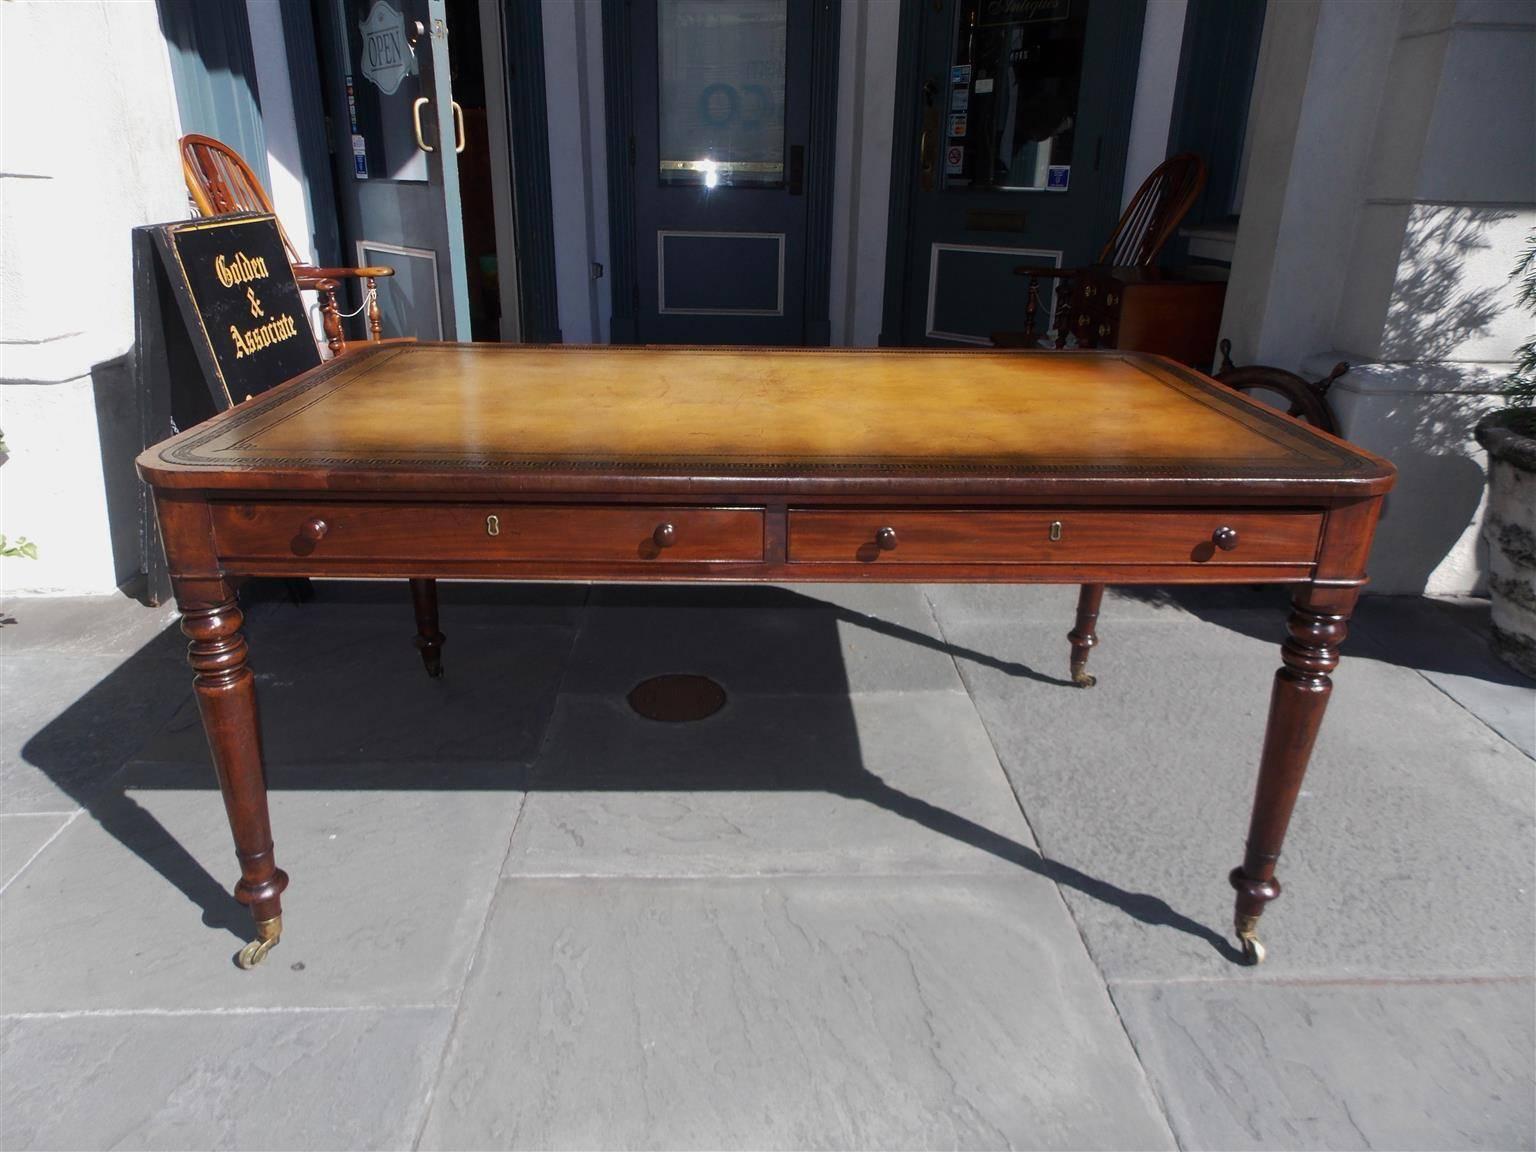 English mahogany two drawer leather top writing desk with Greek Key tooling, original wooden knobs, rounded corners, and terminating on turned bulbous ringed legs with the original brass casters.  Early 19th Century.